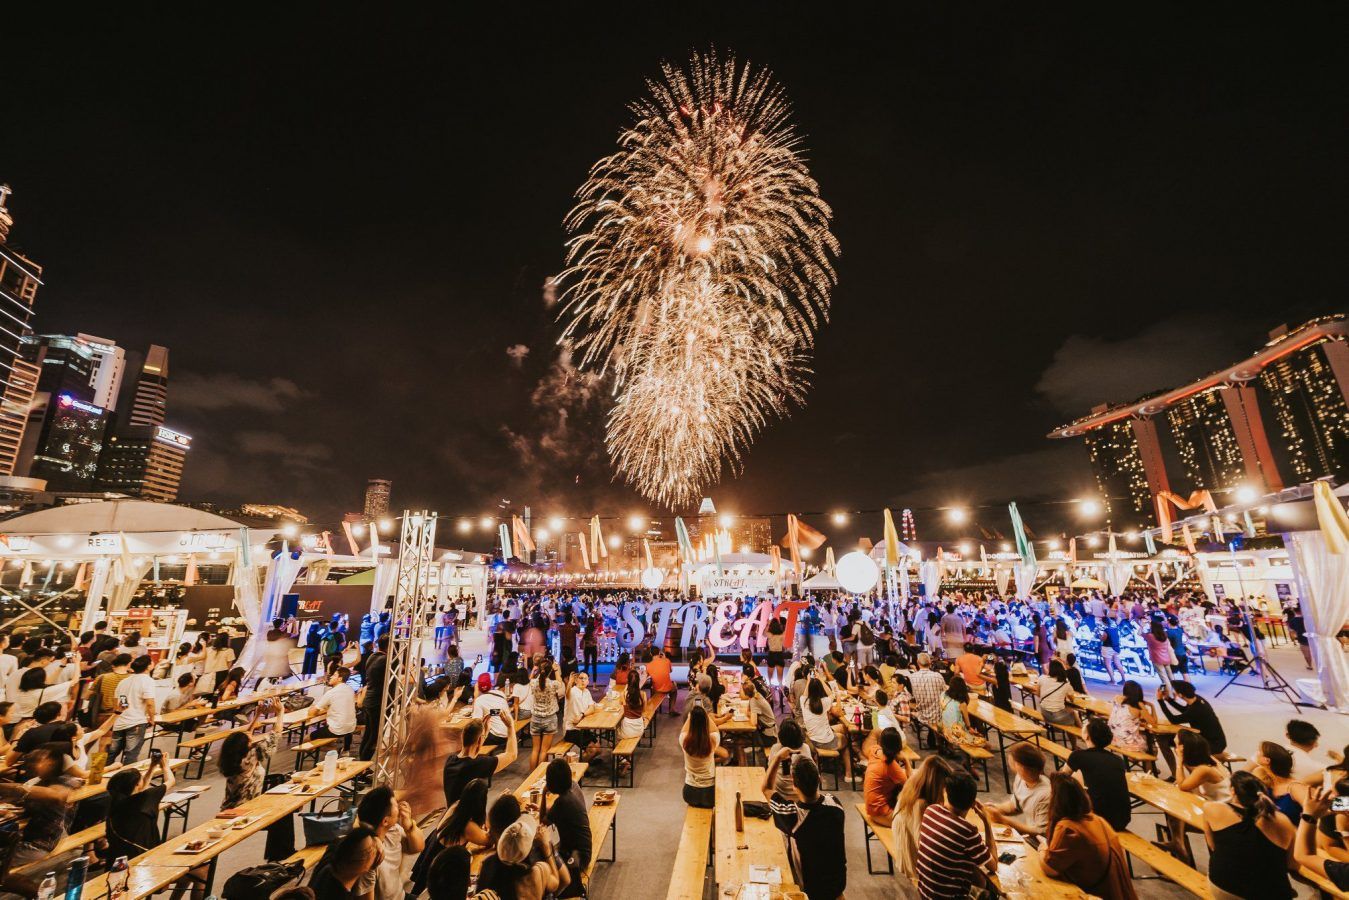 What to expect when Singapore Food Festival 2022 returns on 24 August